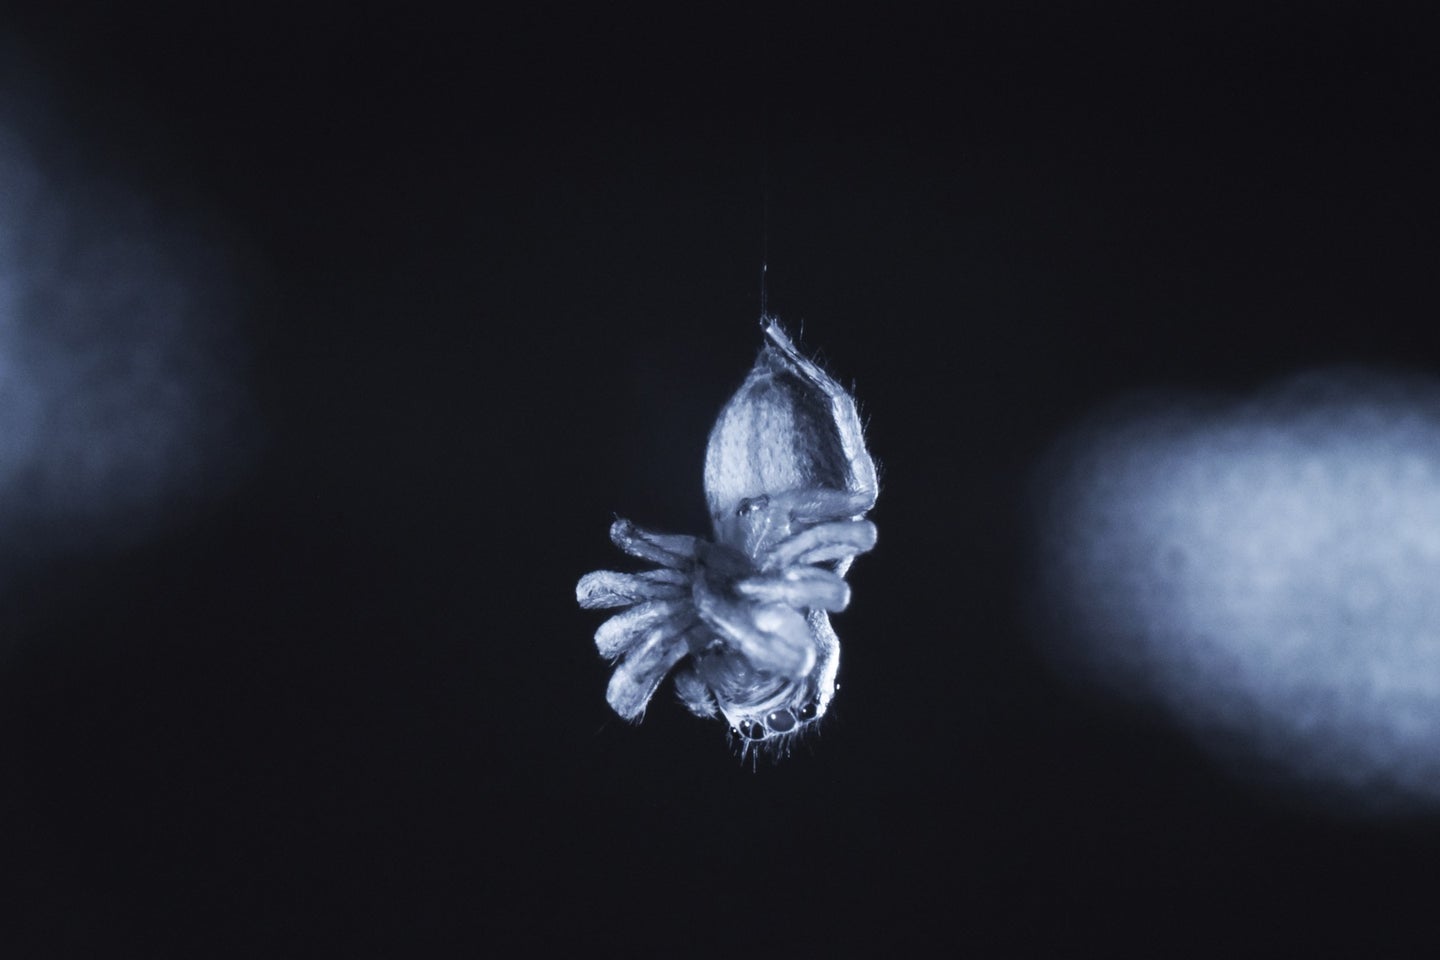 a black and white ghostly image of a jumping spider hanging by a thin silk strand in a sleep-like state